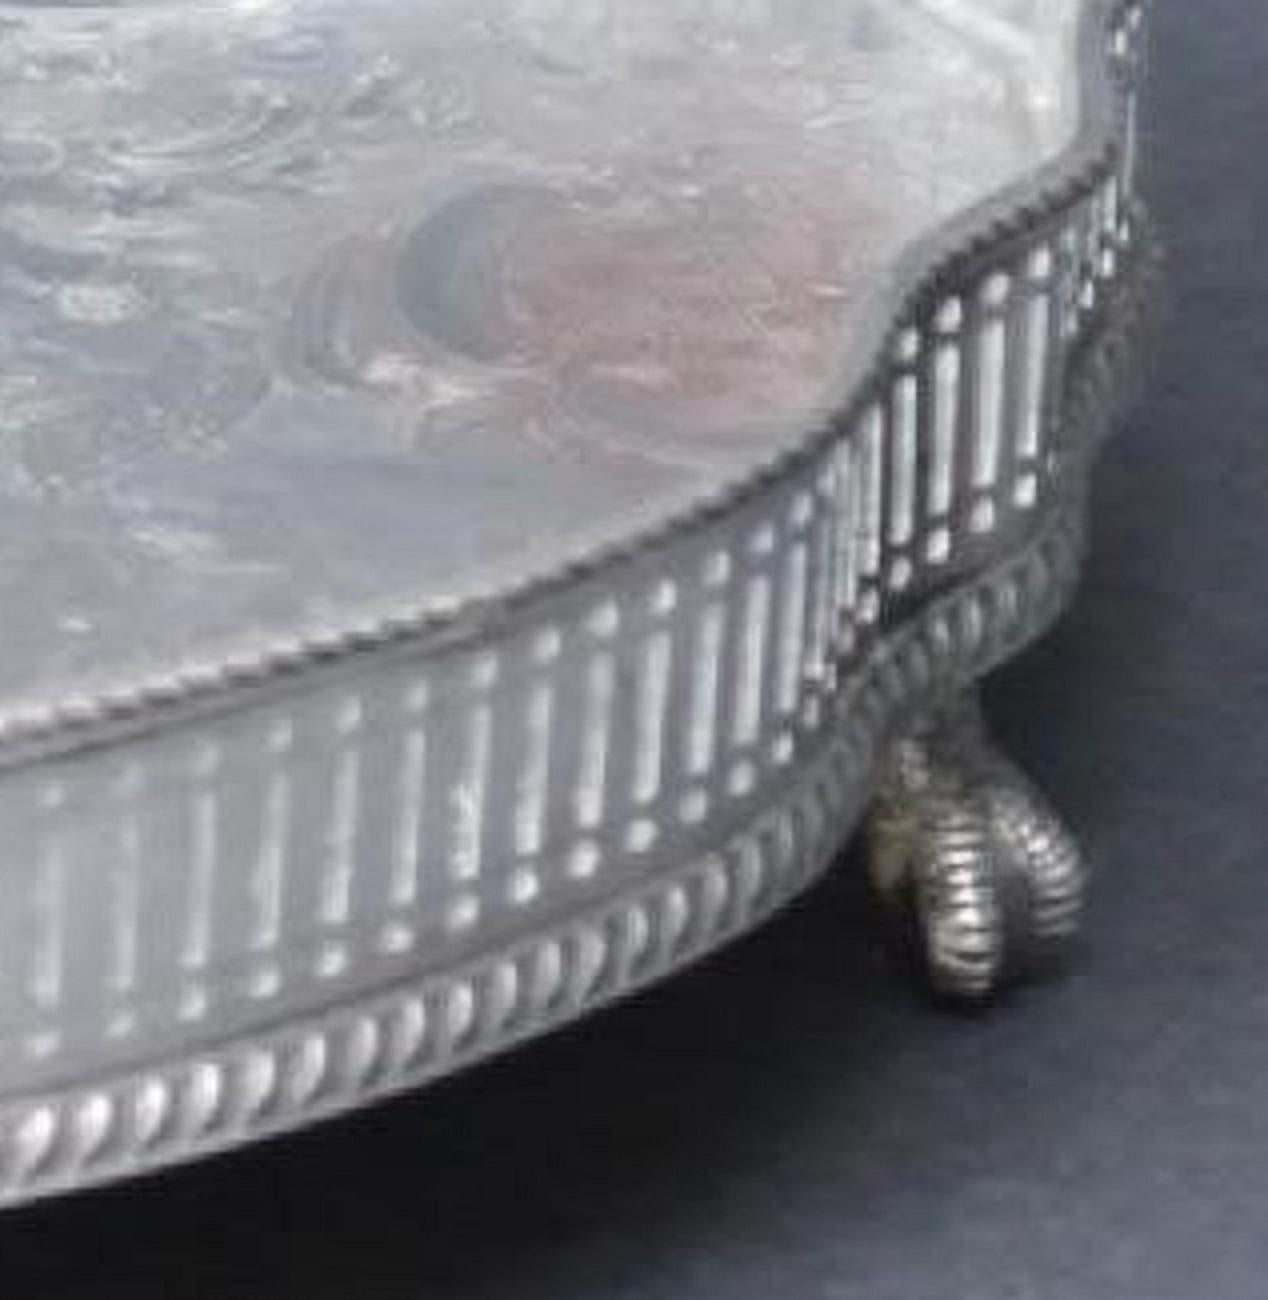 Serving Salver, English, mid-20th century, silver plated

An English mid-20th century round-shaped silver plated (copper on silver) serving salver. The center of the piece features a Rococo style engraving with scrolls, foliage and shell